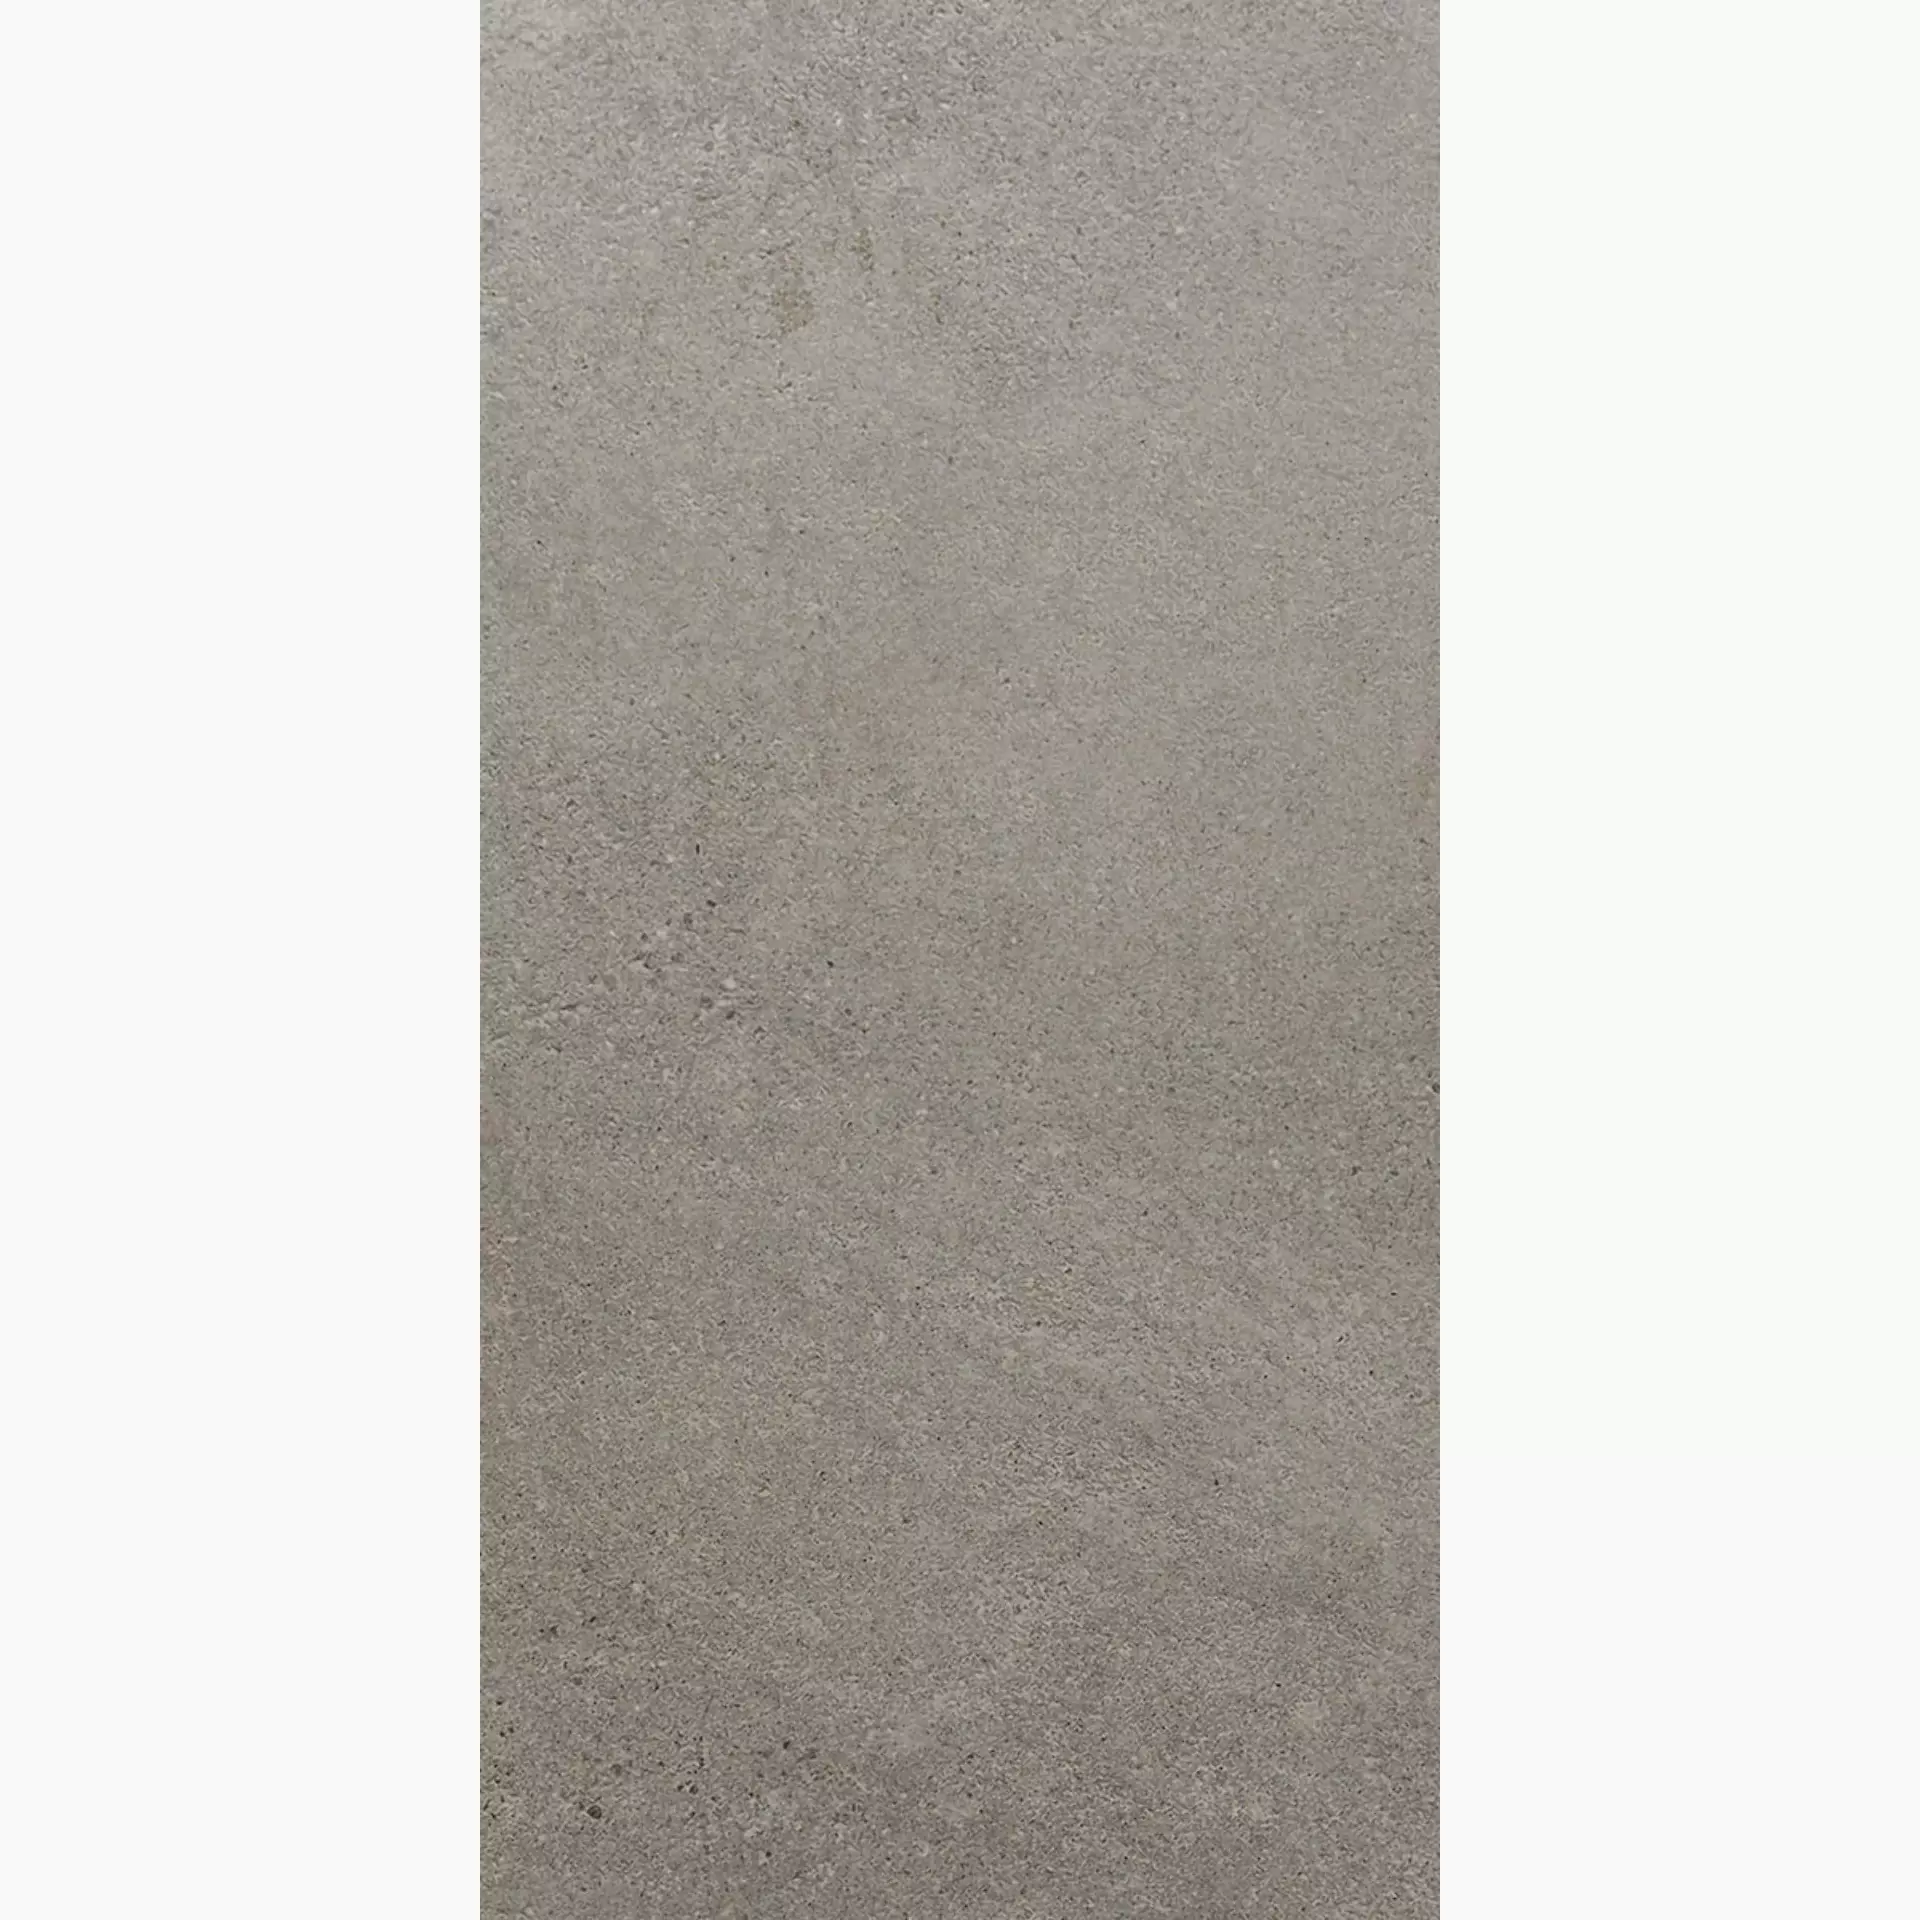 Rondine Loft Taupe Naturale J89021 30x60cm rectified 8,5mm